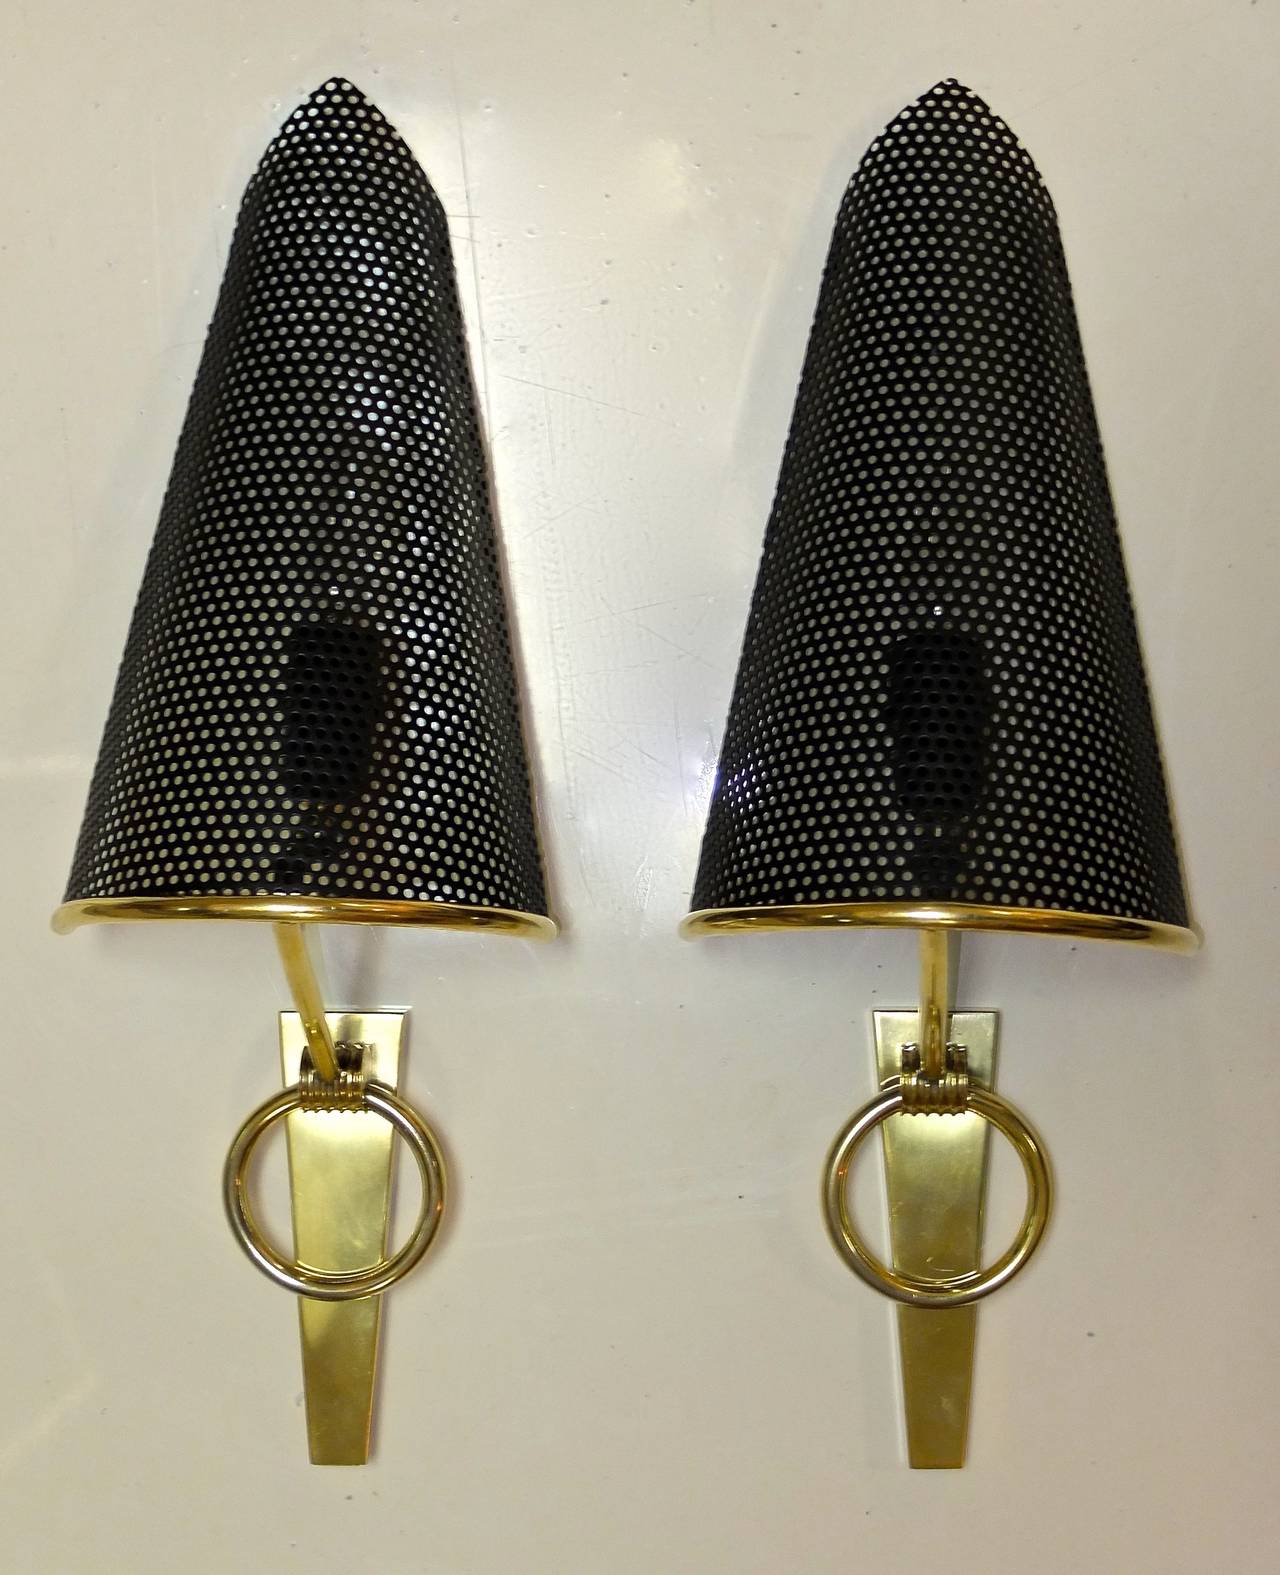 Pair of 1950's French wall sconces with hemi-conical shades made of perforated metal.  Produced for Lunel by Royal Lumiere circa 1953.  Rewired for USA with phenolic single socket for a candelabra bulb up to 60 watts each.